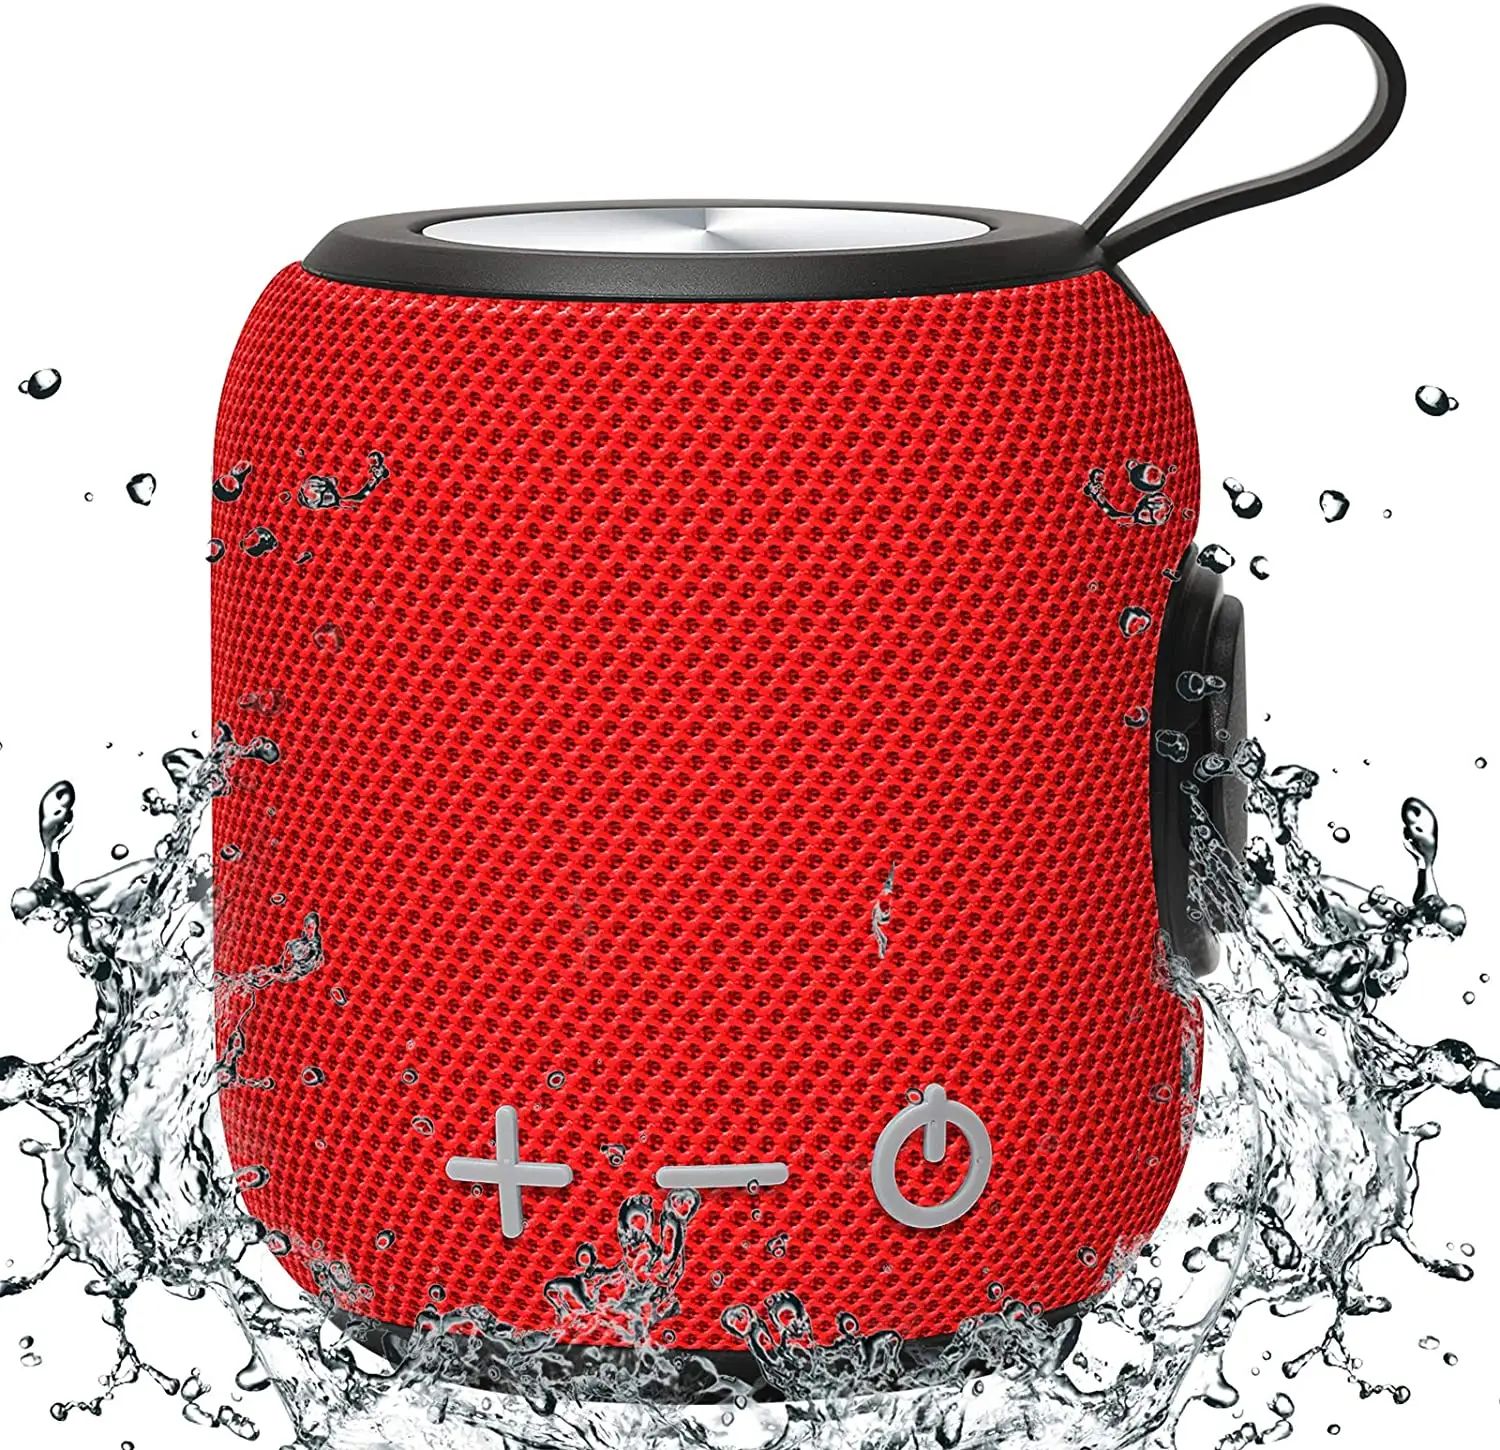 M7 Portable Speakers Super Bass Wireless Speaker Loud Stereo IPX7 Waterproof 30H Playtime for Outdoors Travel Home